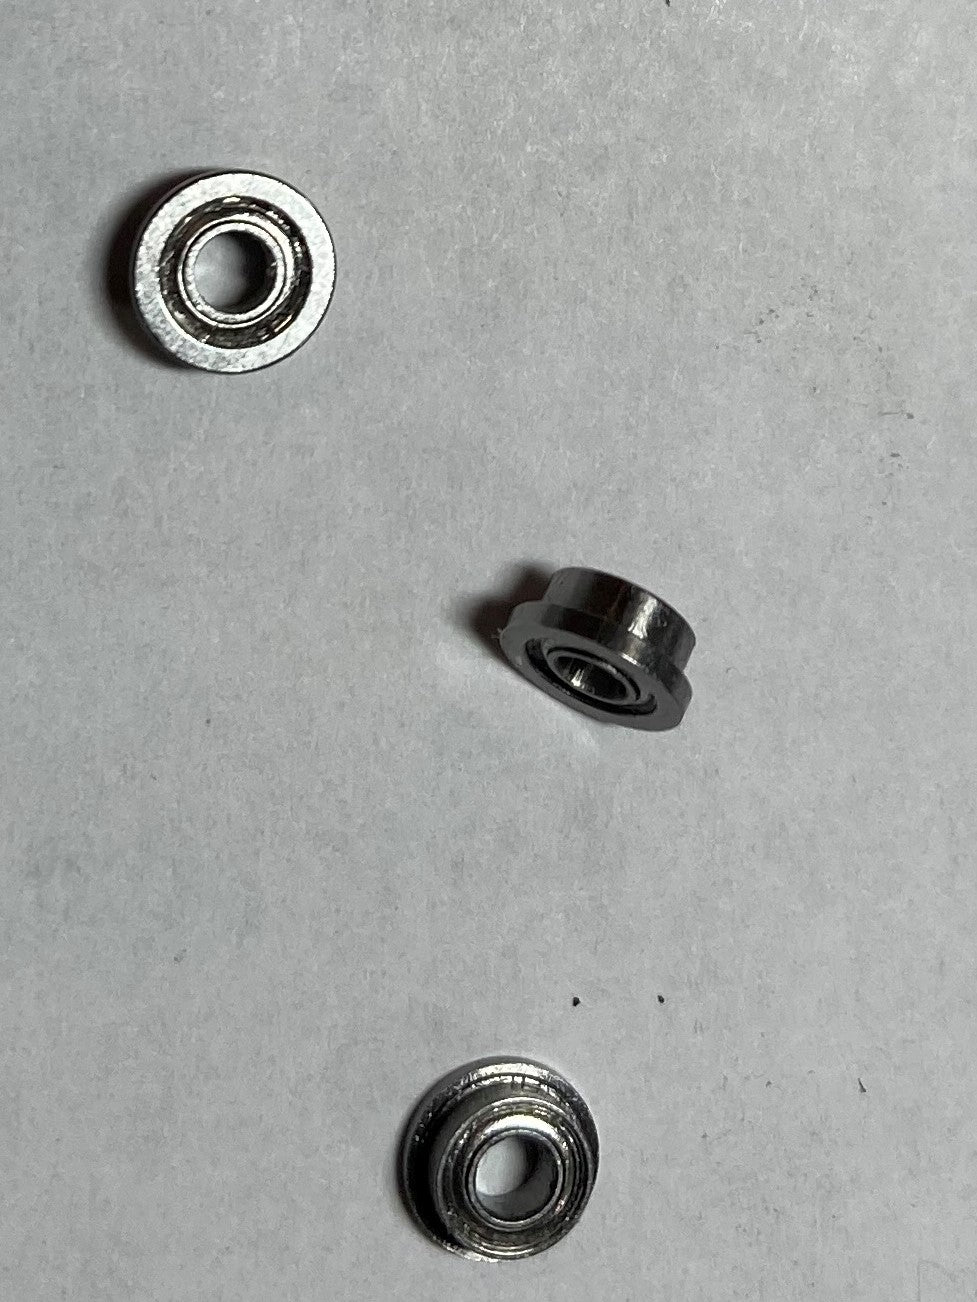 3/32 Axle Ball Bearings - Flanged and Shielded. - One each